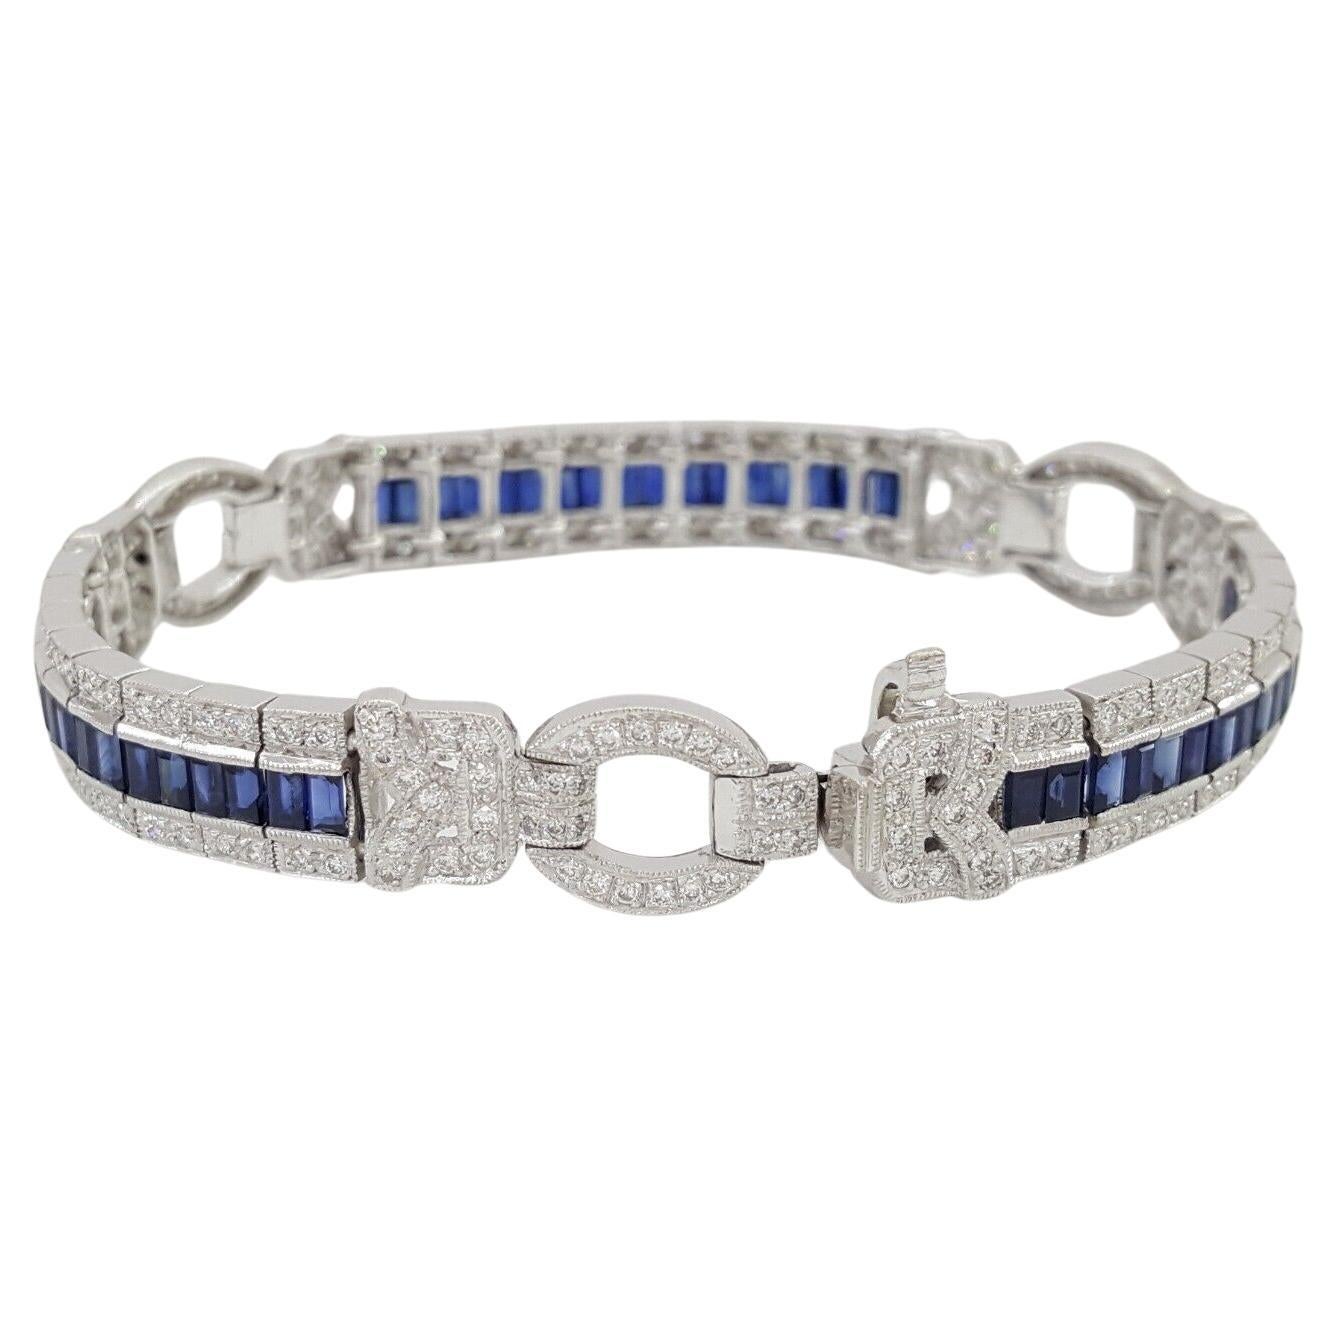 Introducing an exquisite piece of timeless elegance: behold our Authentic Vintage 18K White Gold Bracelet adorned with a captivating combination of Round Brilliant Diamonds and Blue Sapphires.

Crafted to perfection, this bracelet boasts a total of